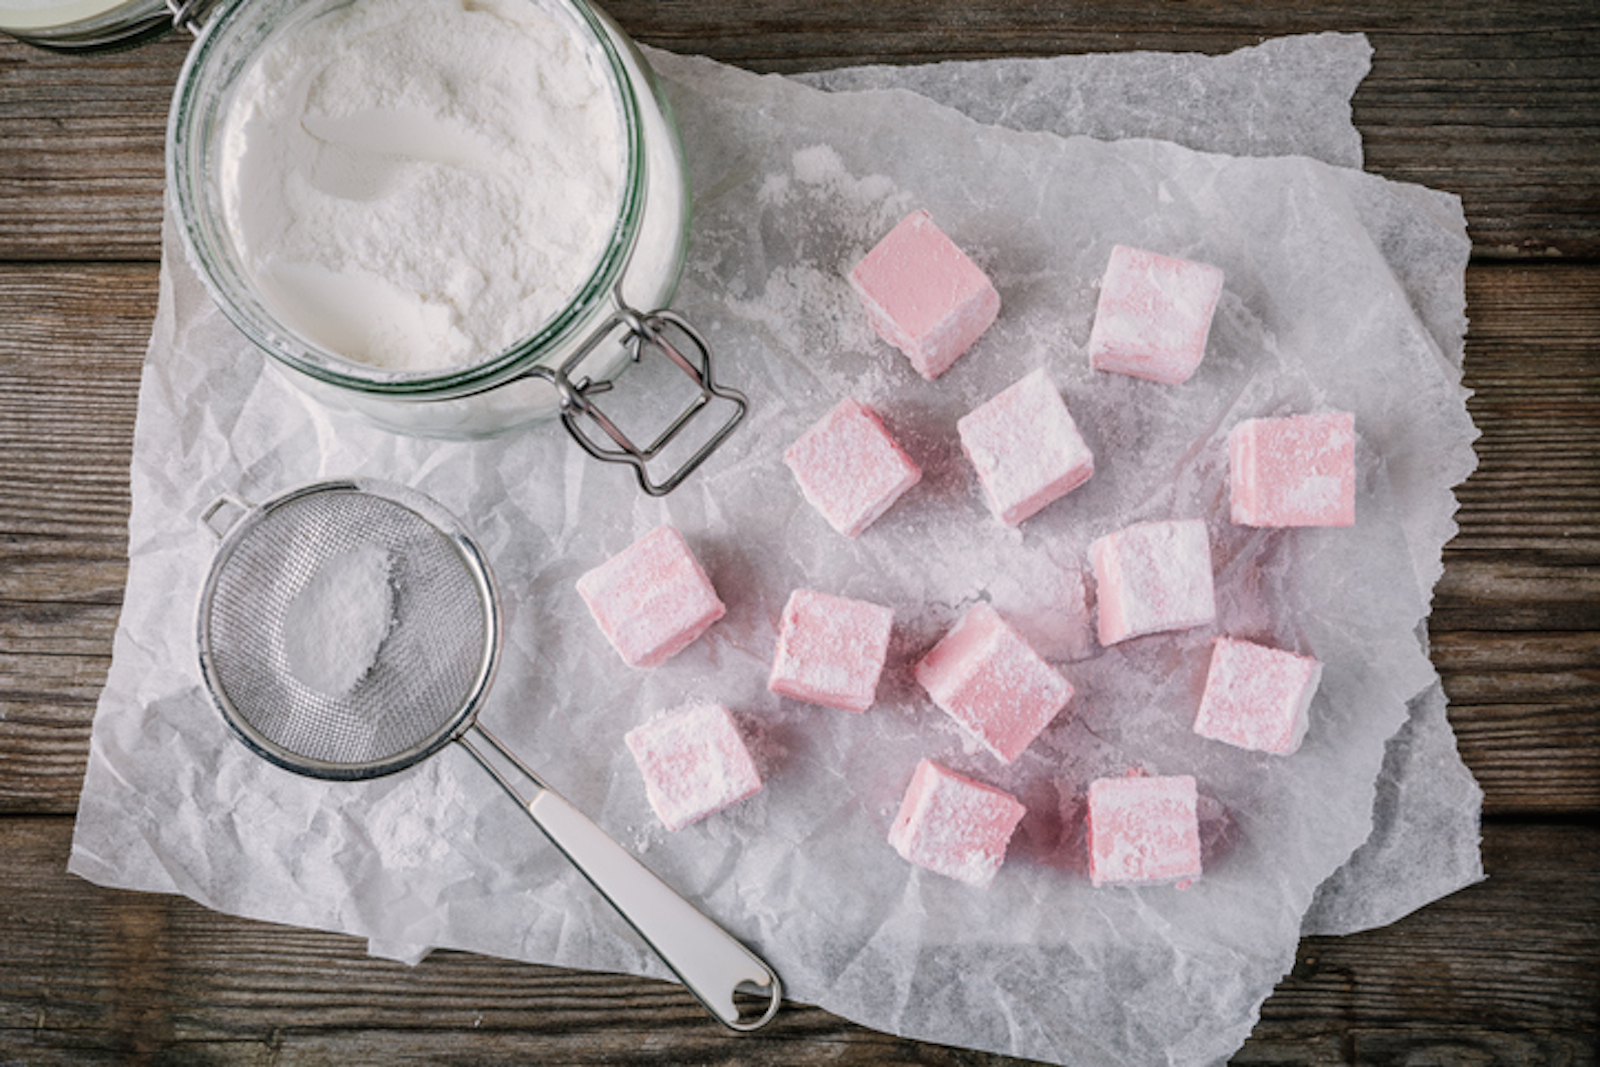 How to prepare marshmallows at home: the recipe for making them